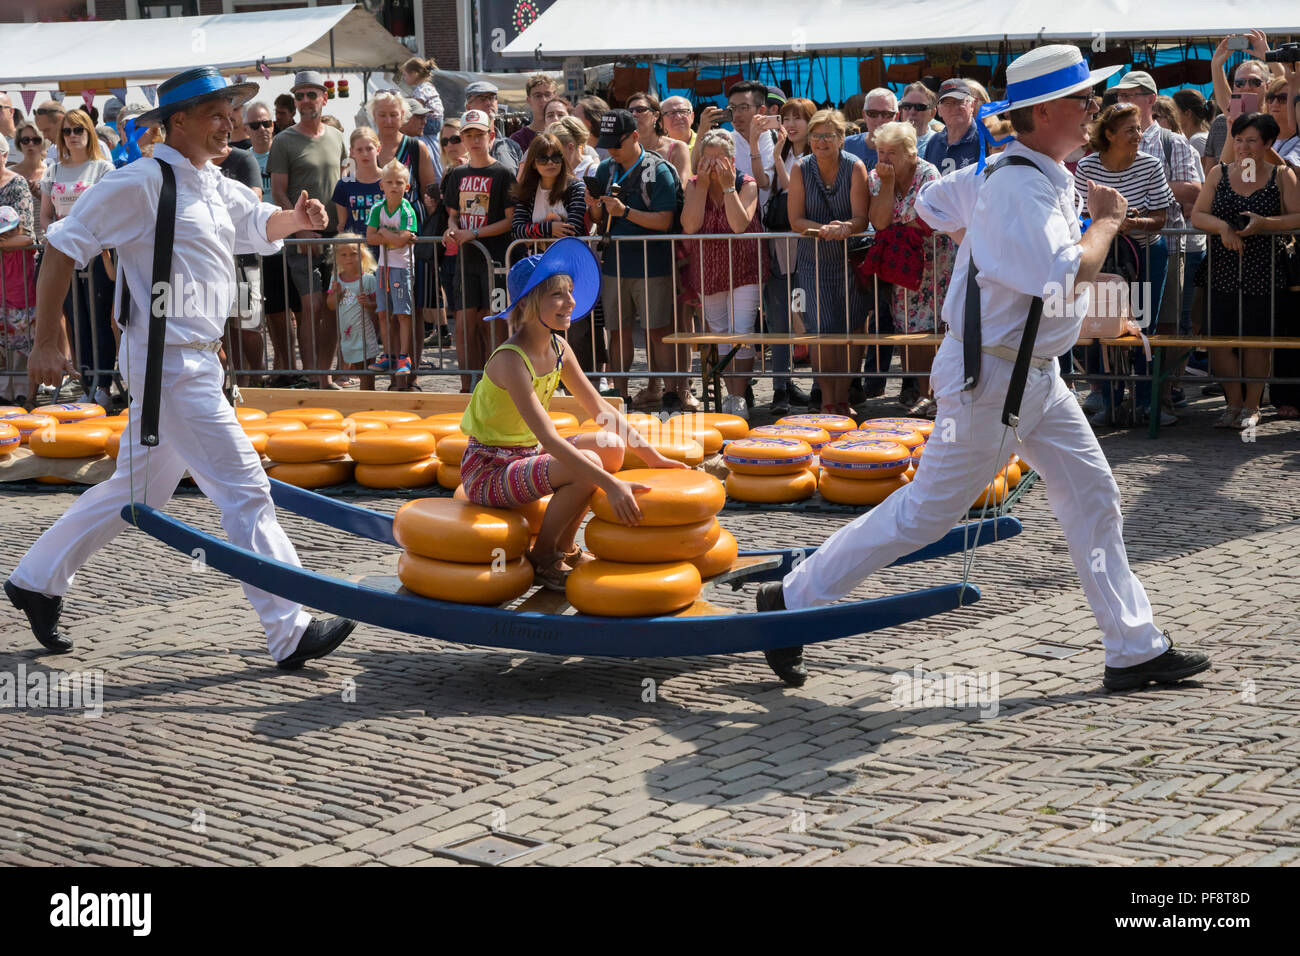 Alkmaar, Netherlands - July 20, 2018: Traditional cheese carriers carrying a little girl sitting on their cheese stretcher Stock Photo